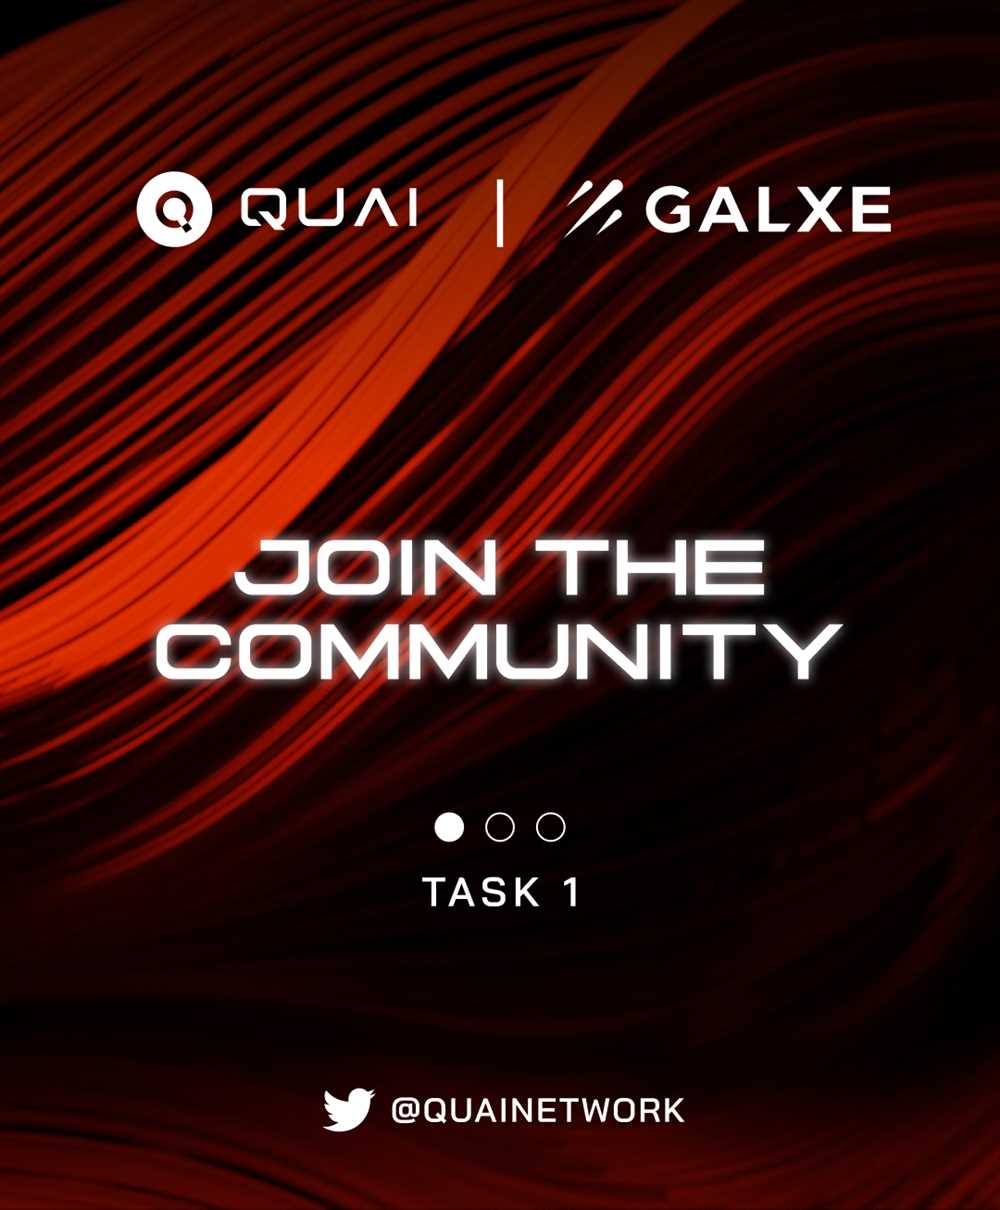 Introducing Galxe Space